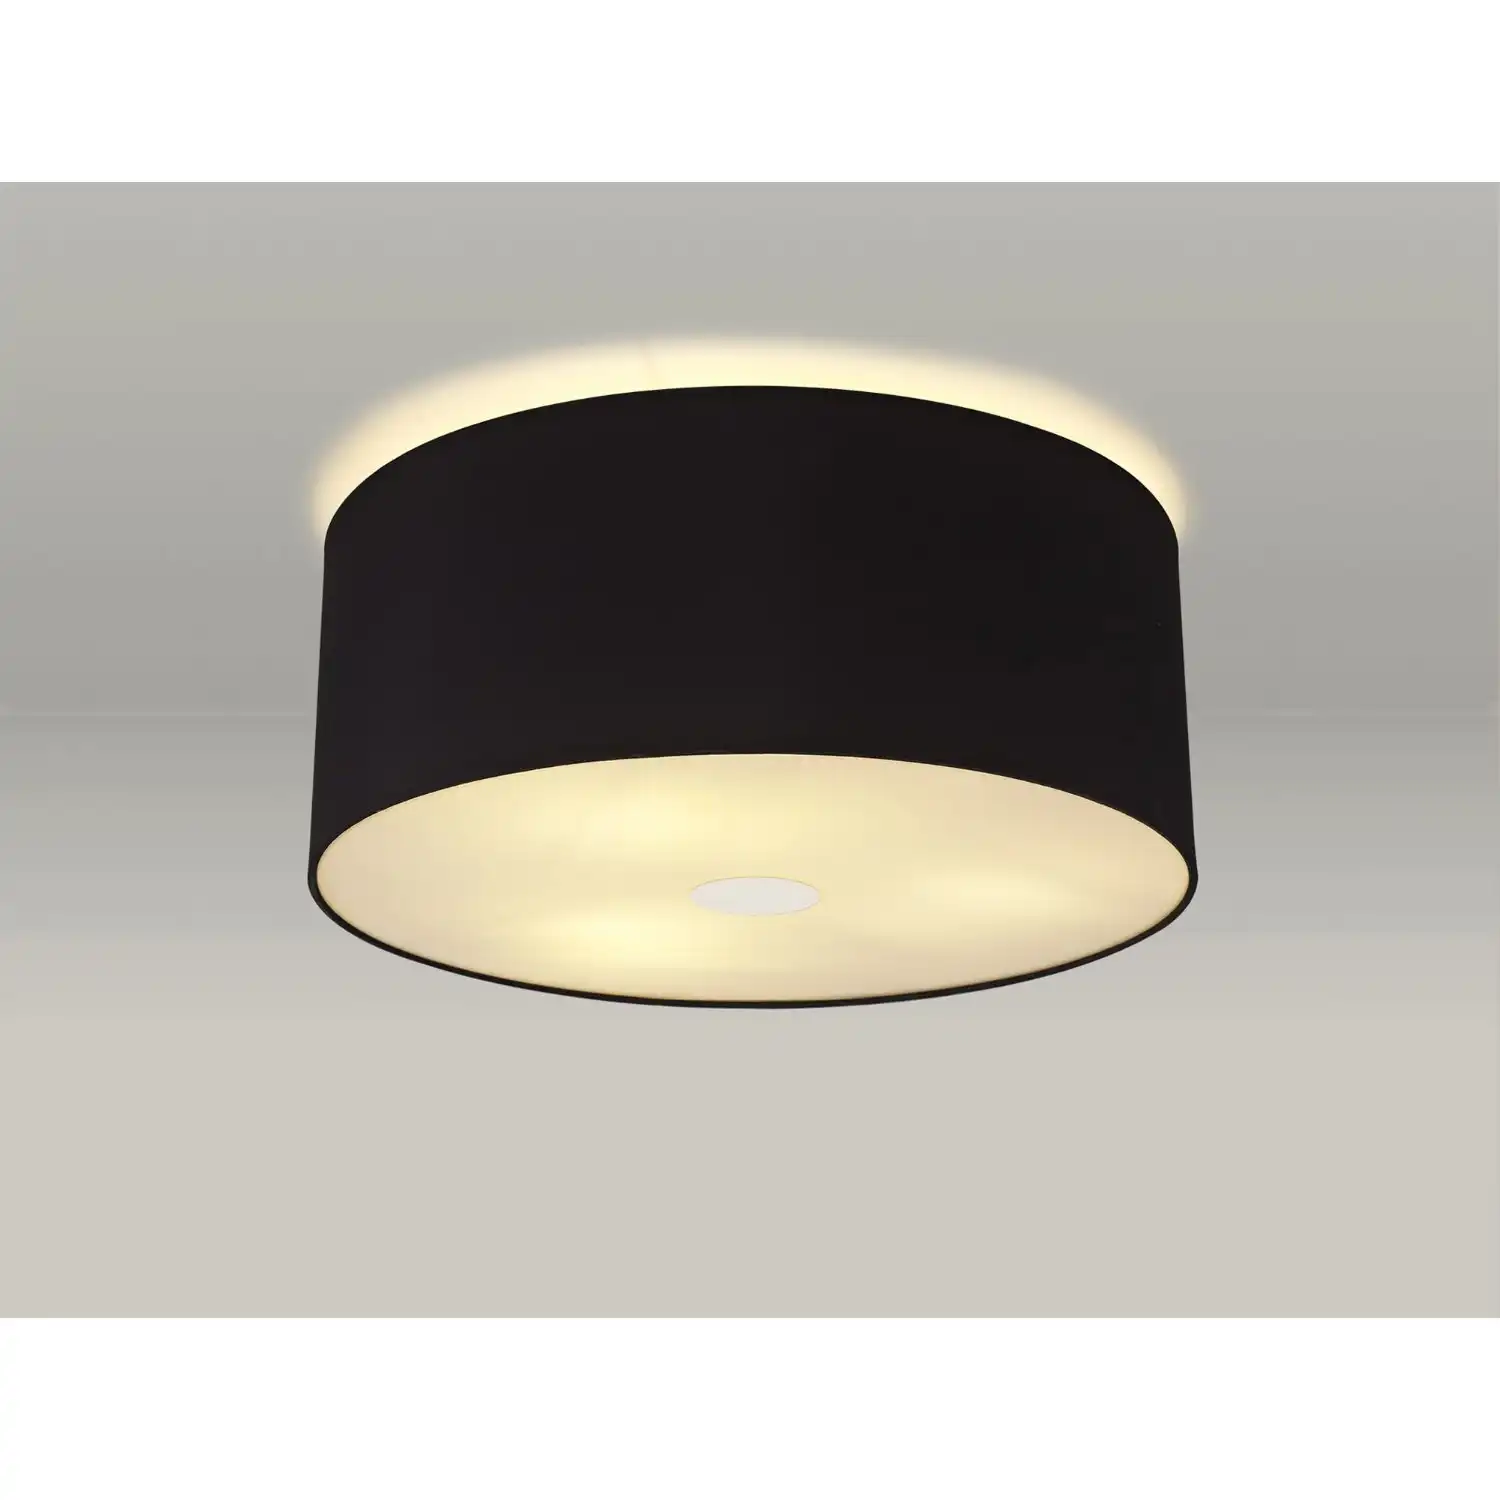 Baymont Polished Chrome 3 Light E27 Drop Flush Ceiling c w 500 Dual Faux Silk Fabric Shade, Black Green Olive And 500mm Frosted PC Acrylic Diffuser